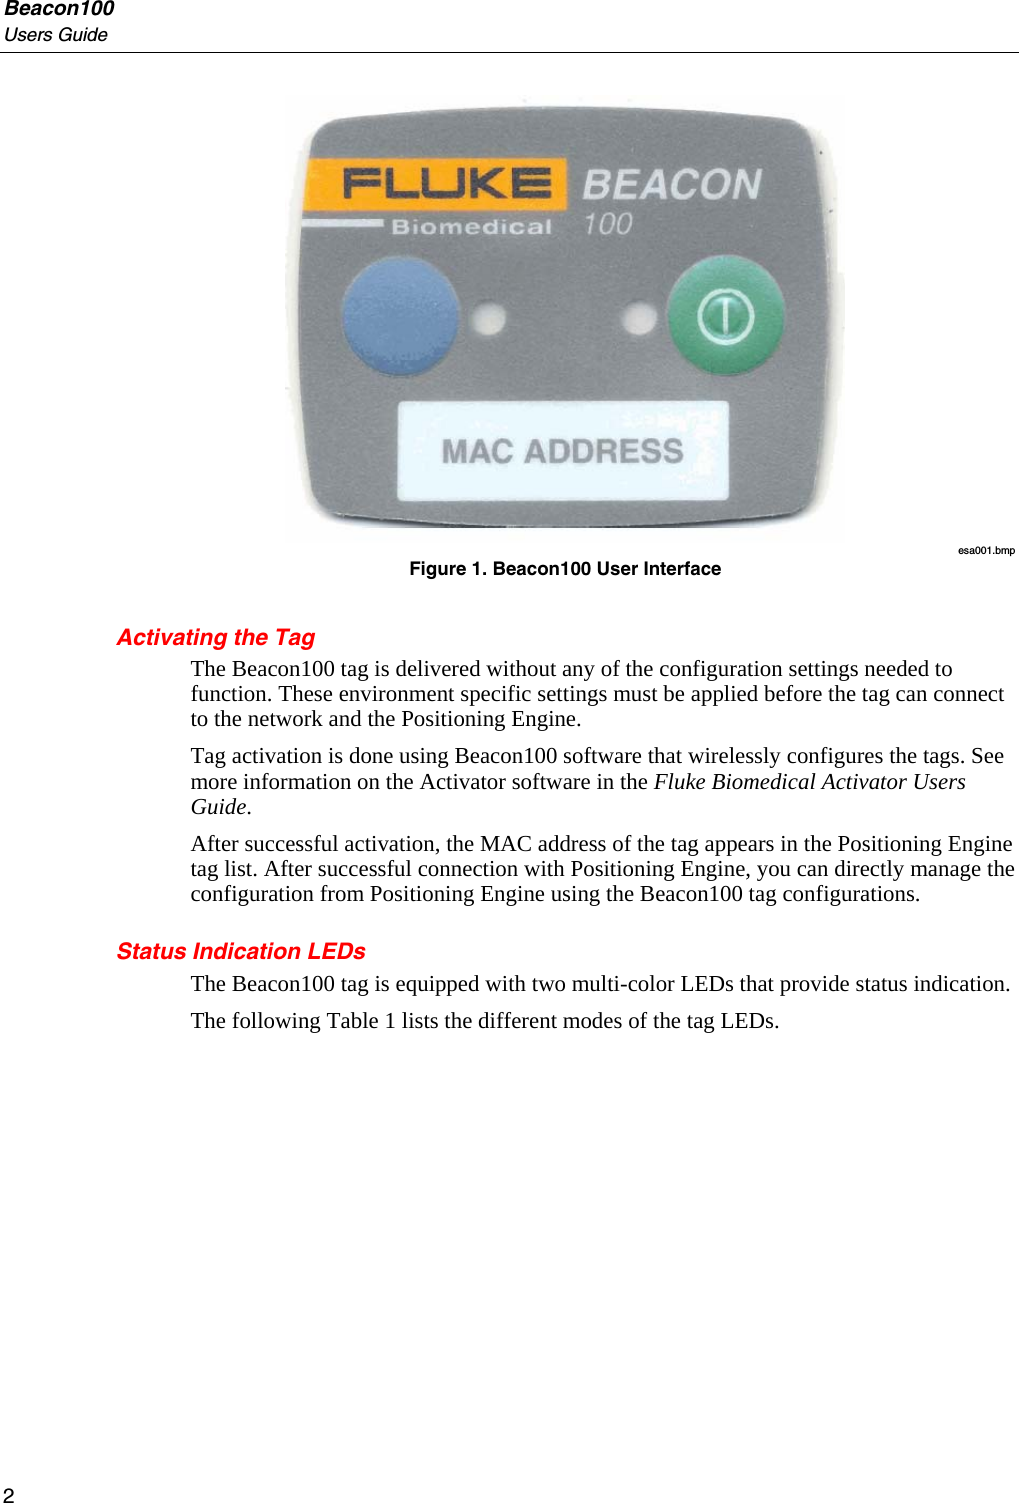 Beacon100 Users Guide  esa001.bmp Figure 1. Beacon100 User Interface Activating the Tag The Beacon100 tag is delivered without any of the configuration settings needed to function. These environment specific settings must be applied before the tag can connect to the network and the Positioning Engine.  Tag activation is done using Beacon100 software that wirelessly configures the tags. See more information on the Activator software in the Fluke Biomedical Activator Users Guide.  After successful activation, the MAC address of the tag appears in the Positioning Engine tag list. After successful connection with Positioning Engine, you can directly manage the configuration from Positioning Engine using the Beacon100 tag configurations. Status Indication LEDs The Beacon100 tag is equipped with two multi-color LEDs that provide status indication.  The following Table 1 lists the different modes of the tag LEDs. 2 